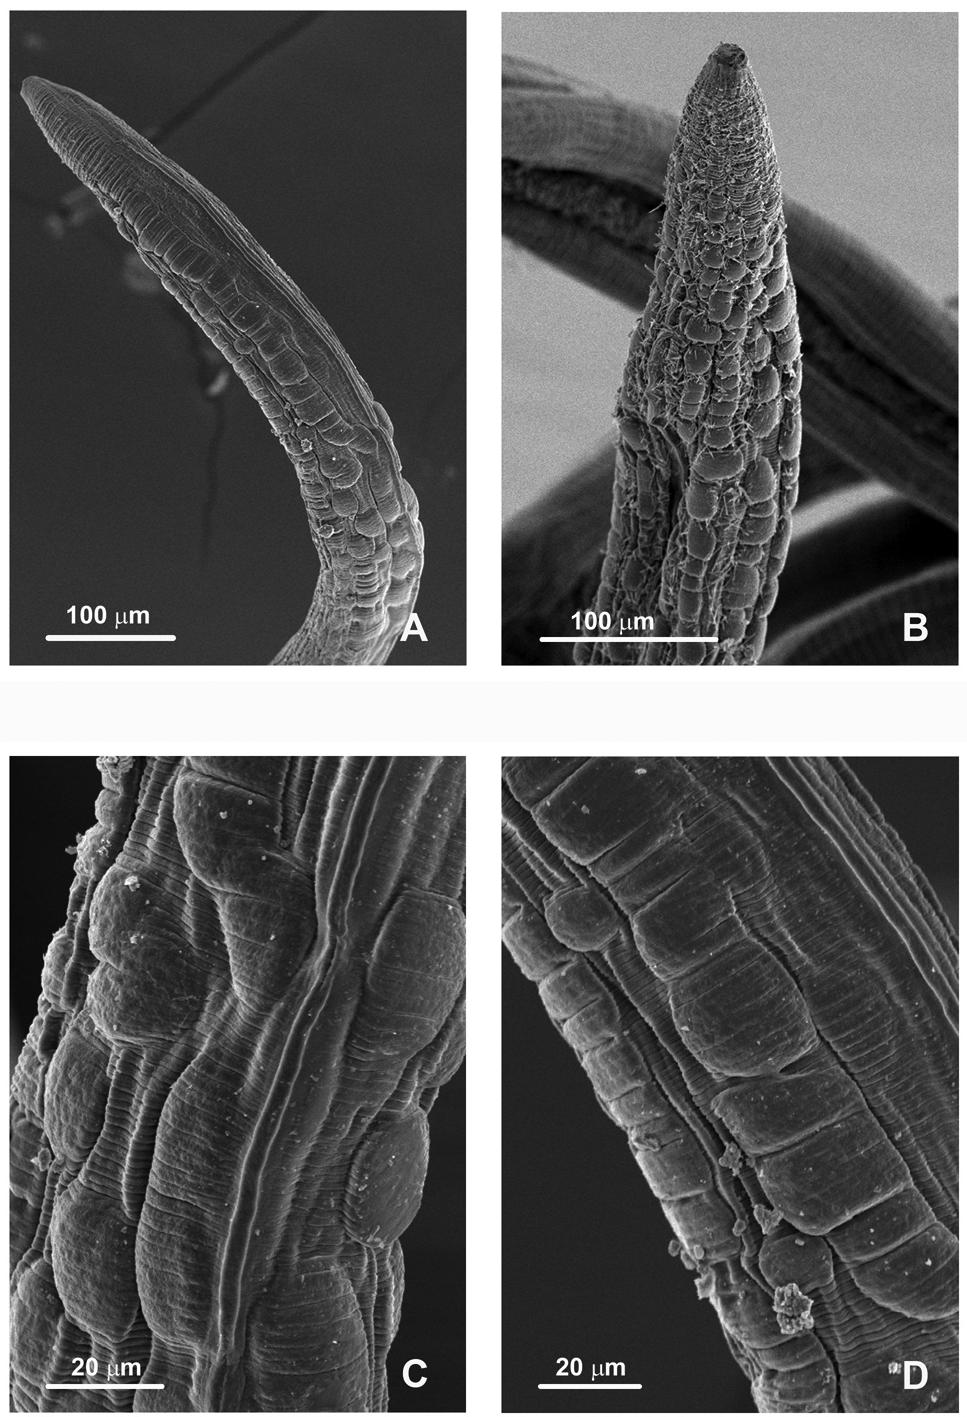 FIGURE 2. Scanning electron micrographs of Gongylonema archboldi n. sp. A. Male, anterior end with prominent cuticular bosses, ventro-lateral view. B.